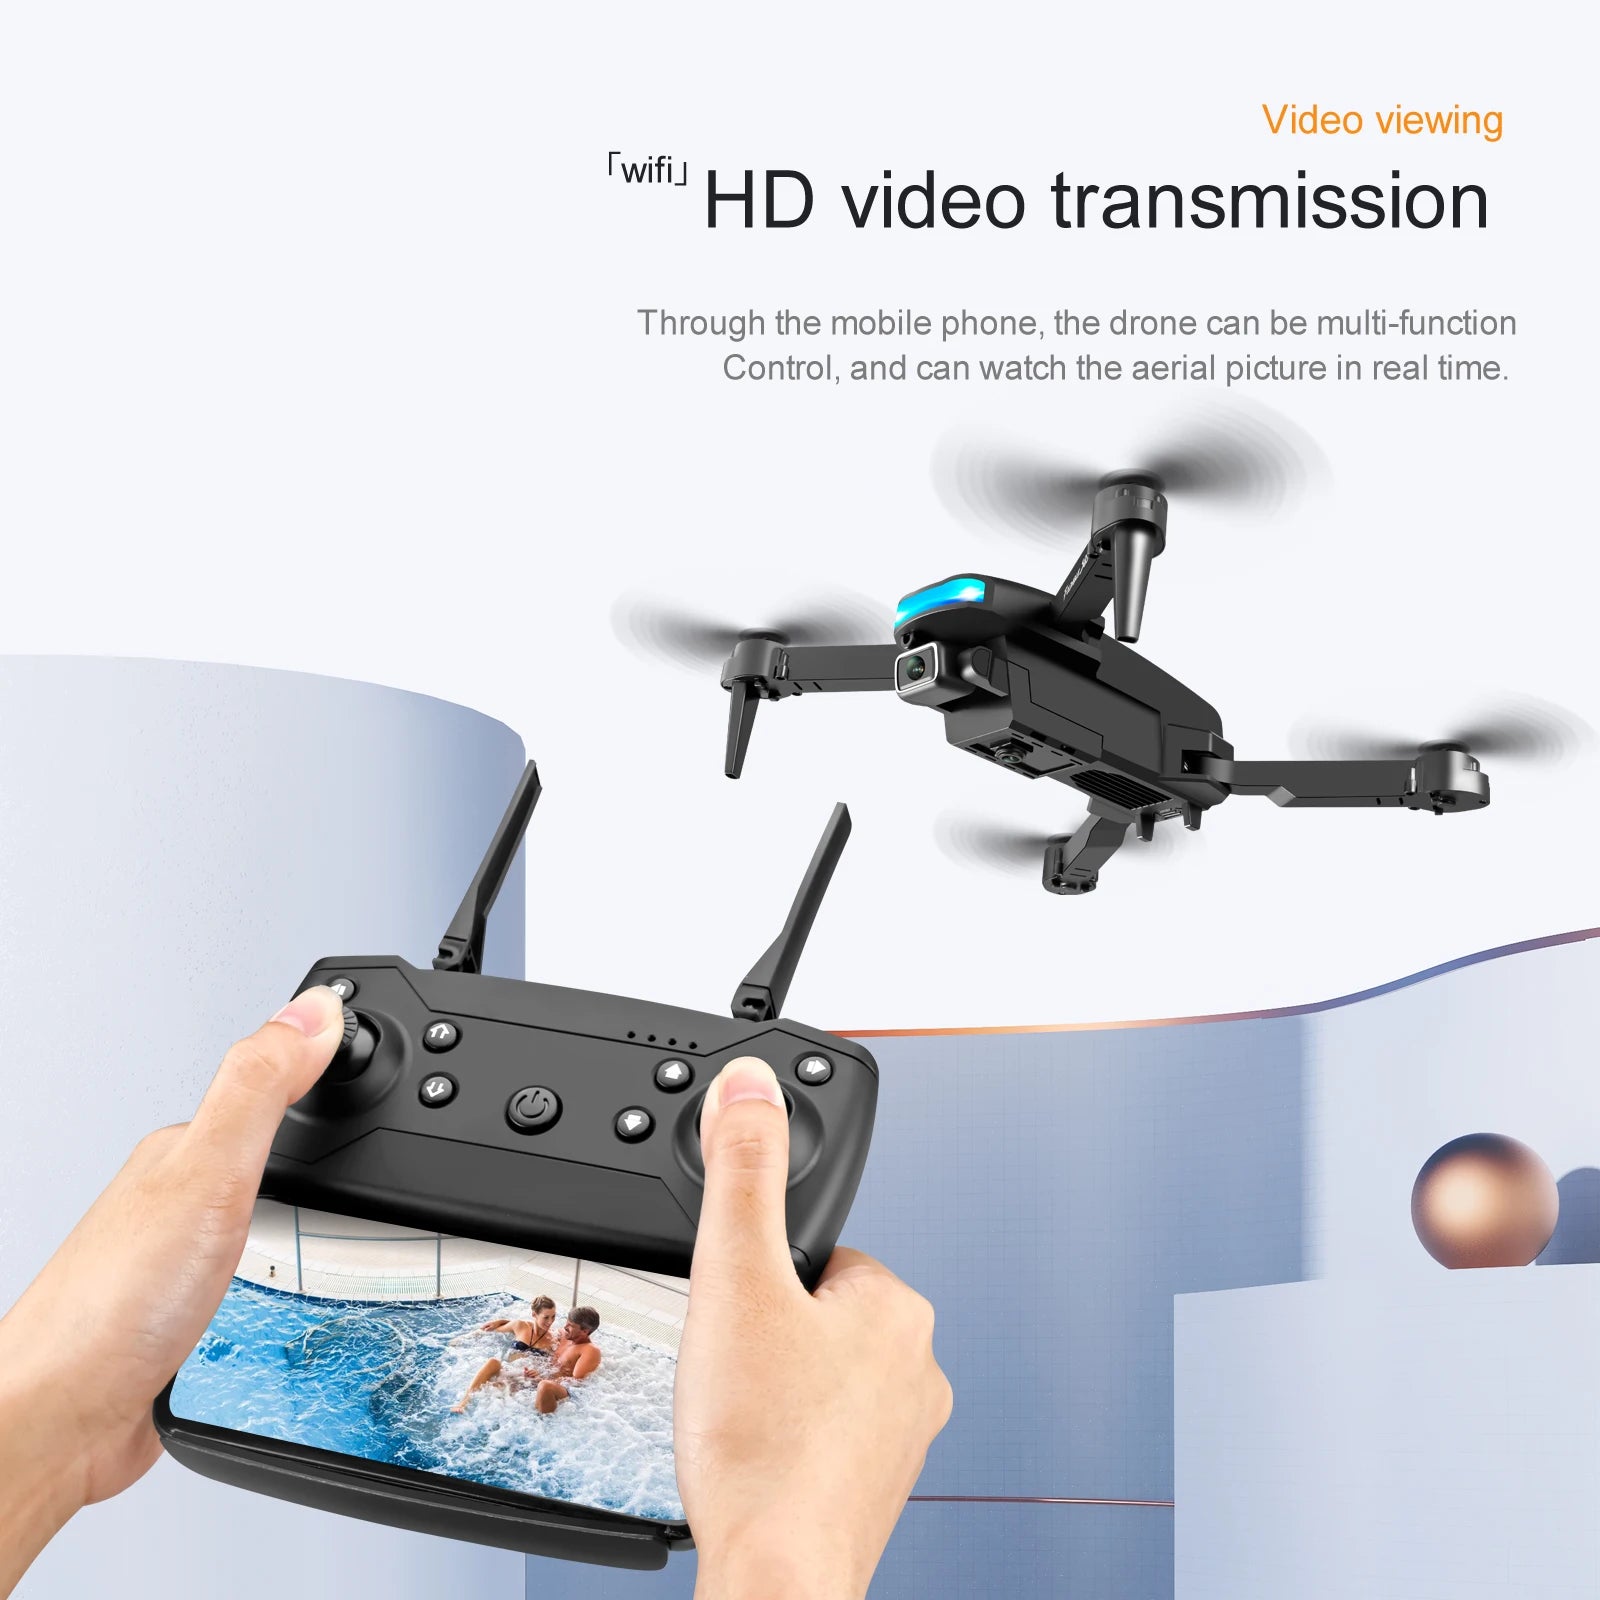 S85 Drone, the drone can be multi-function control, and can watch the aerial